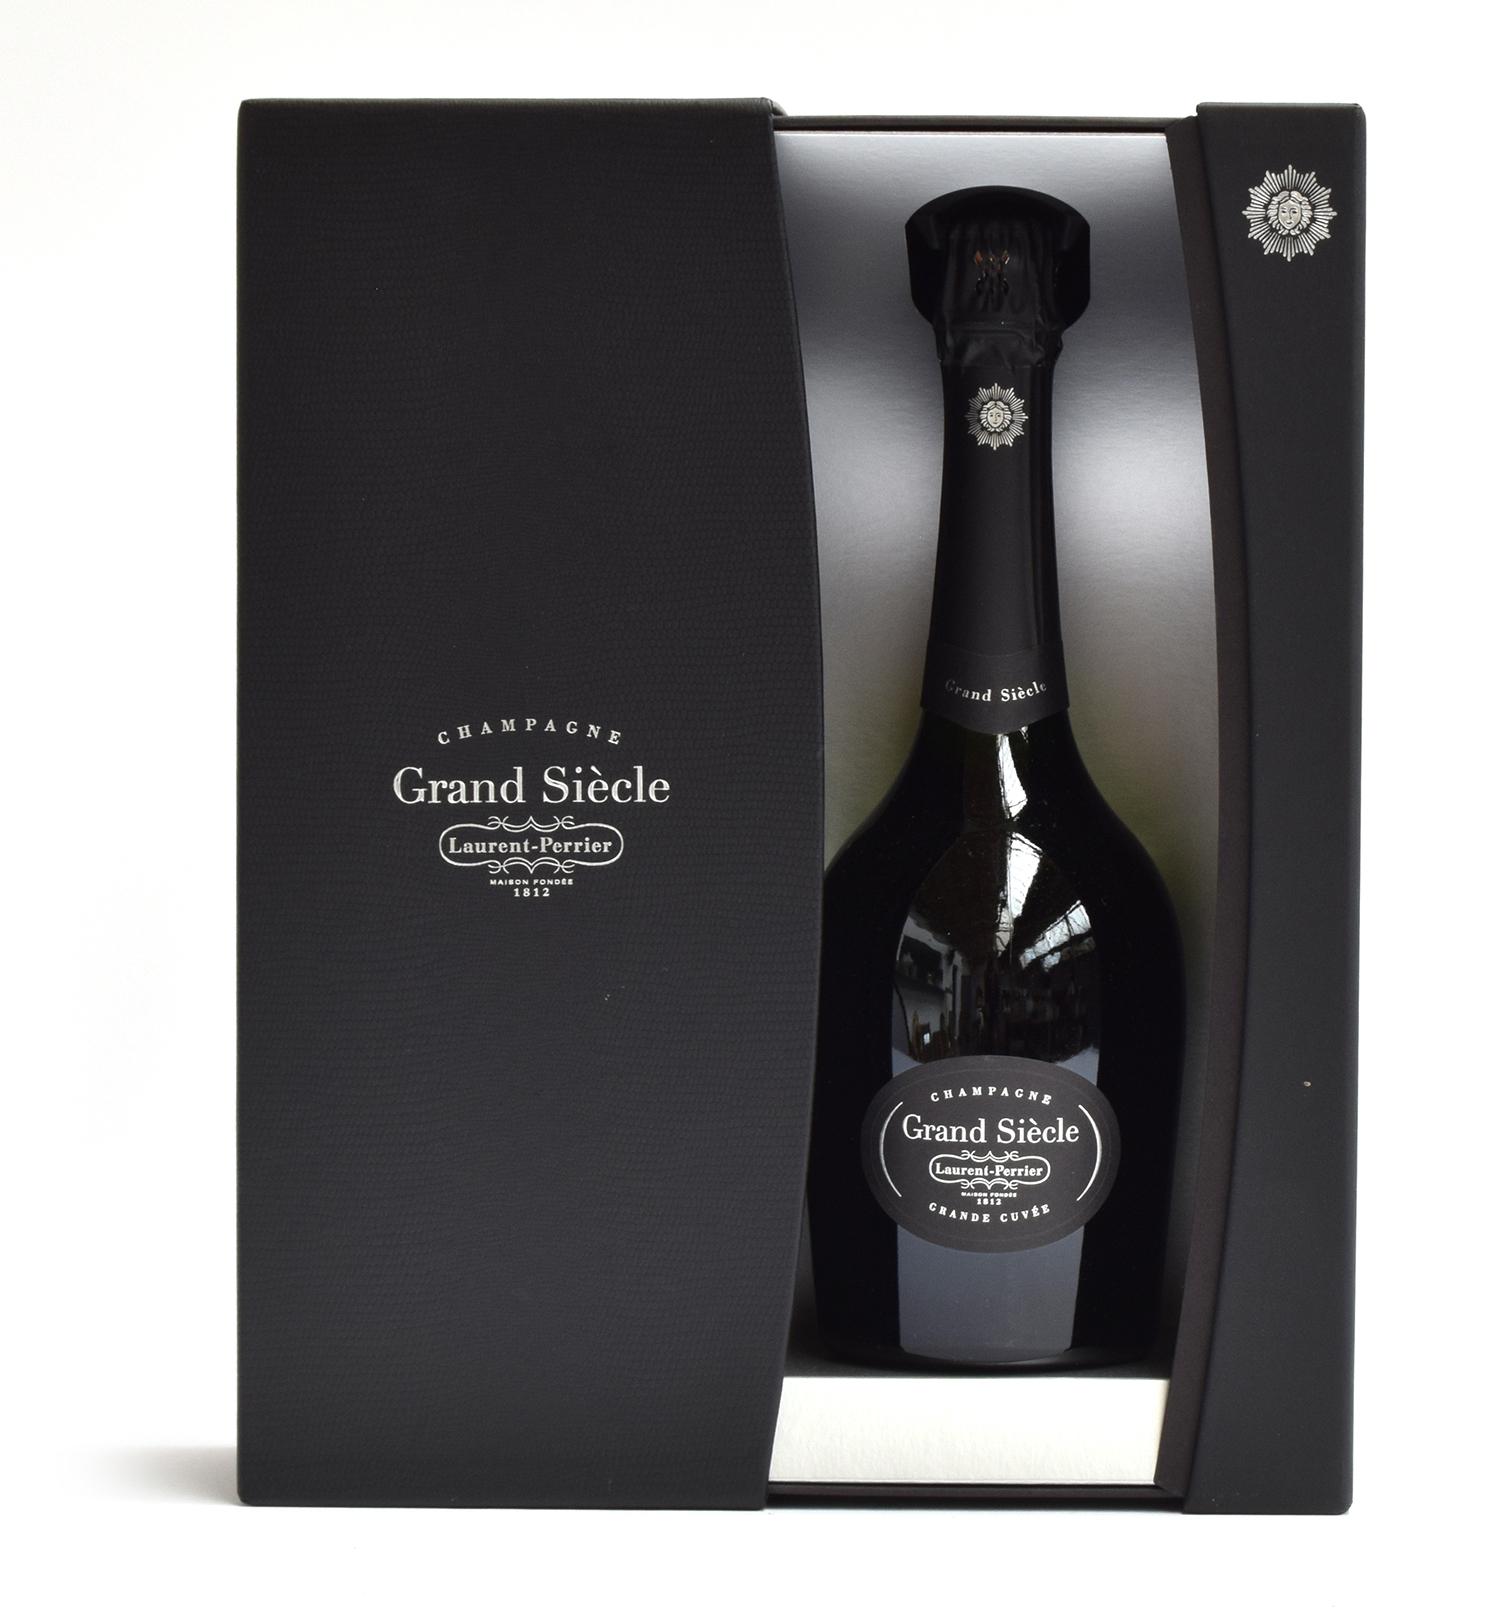 Laurent-Perrier Grand Siecle Brut Champagne (75cl, 12%)